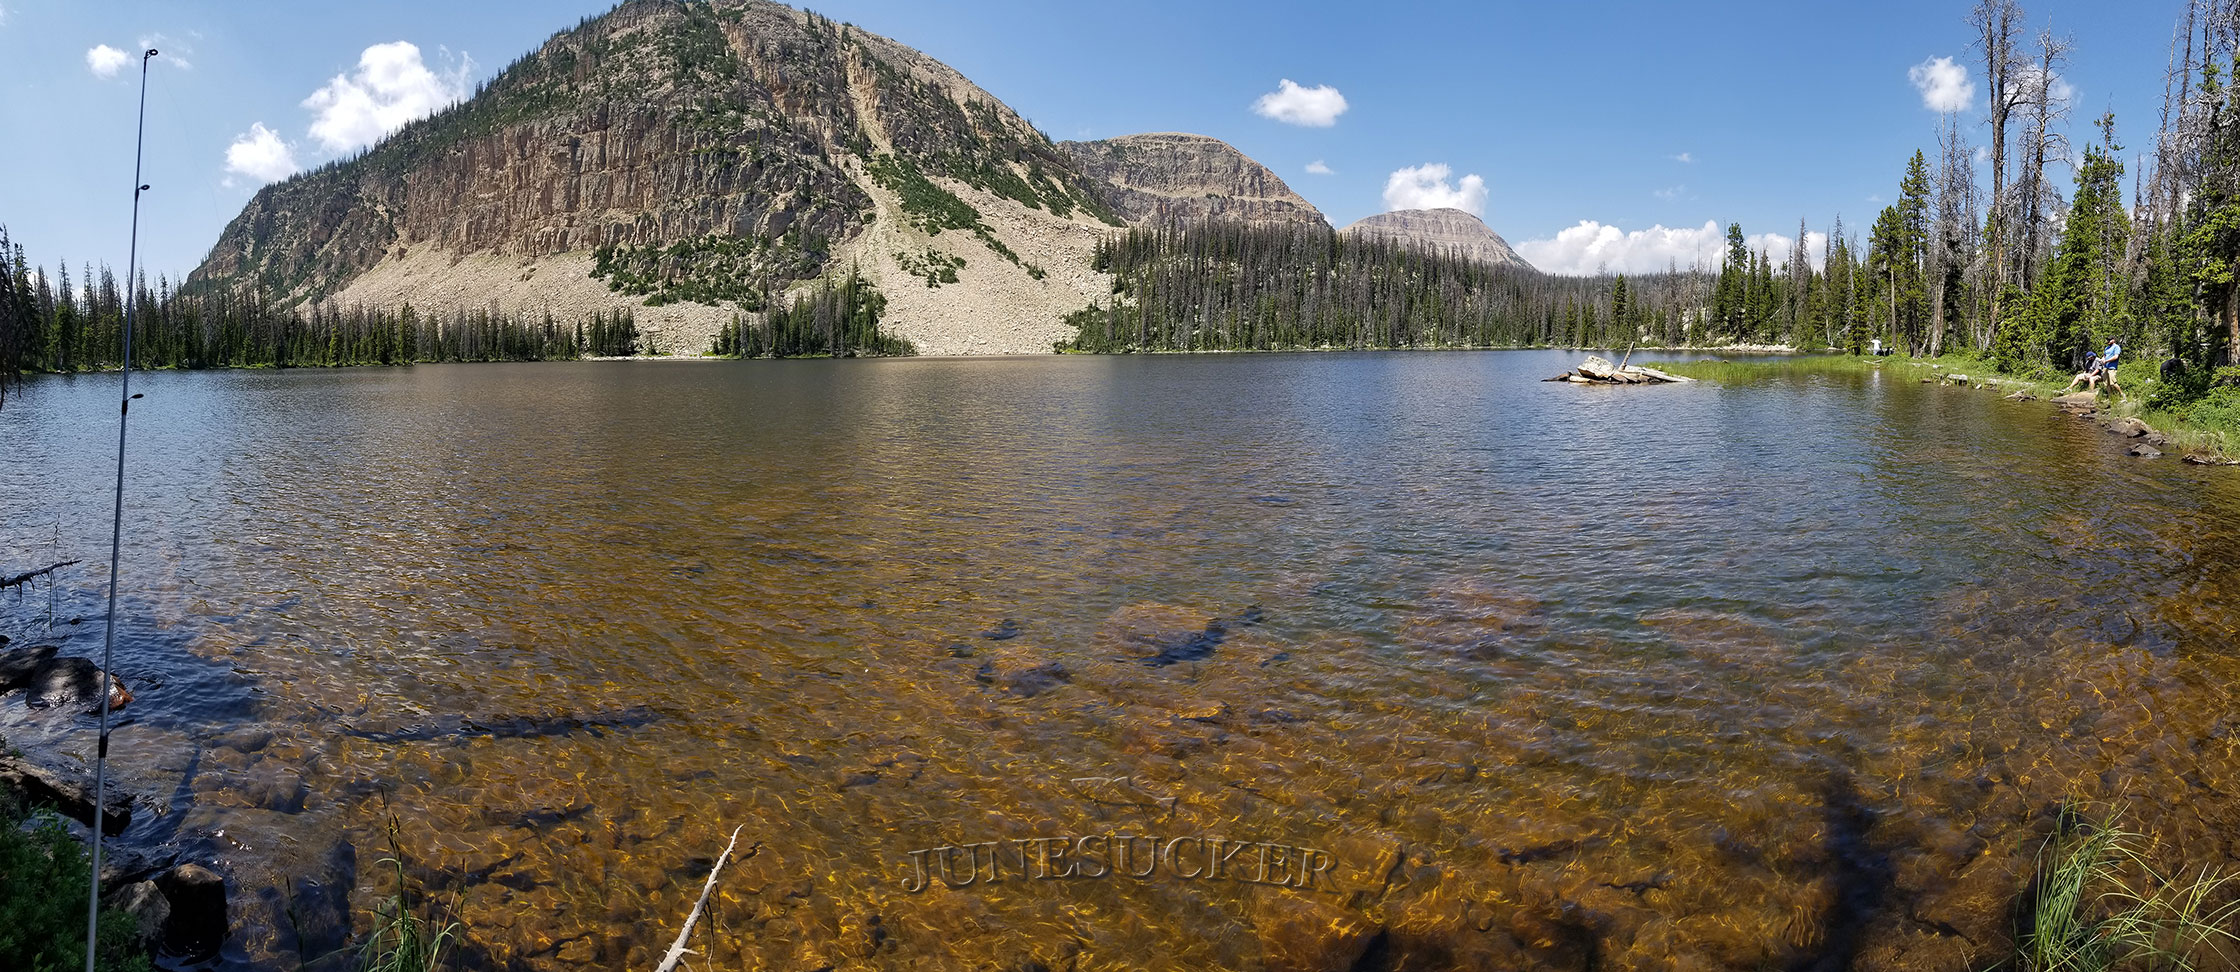 Marshall Lake Z-11 in the Uintas.